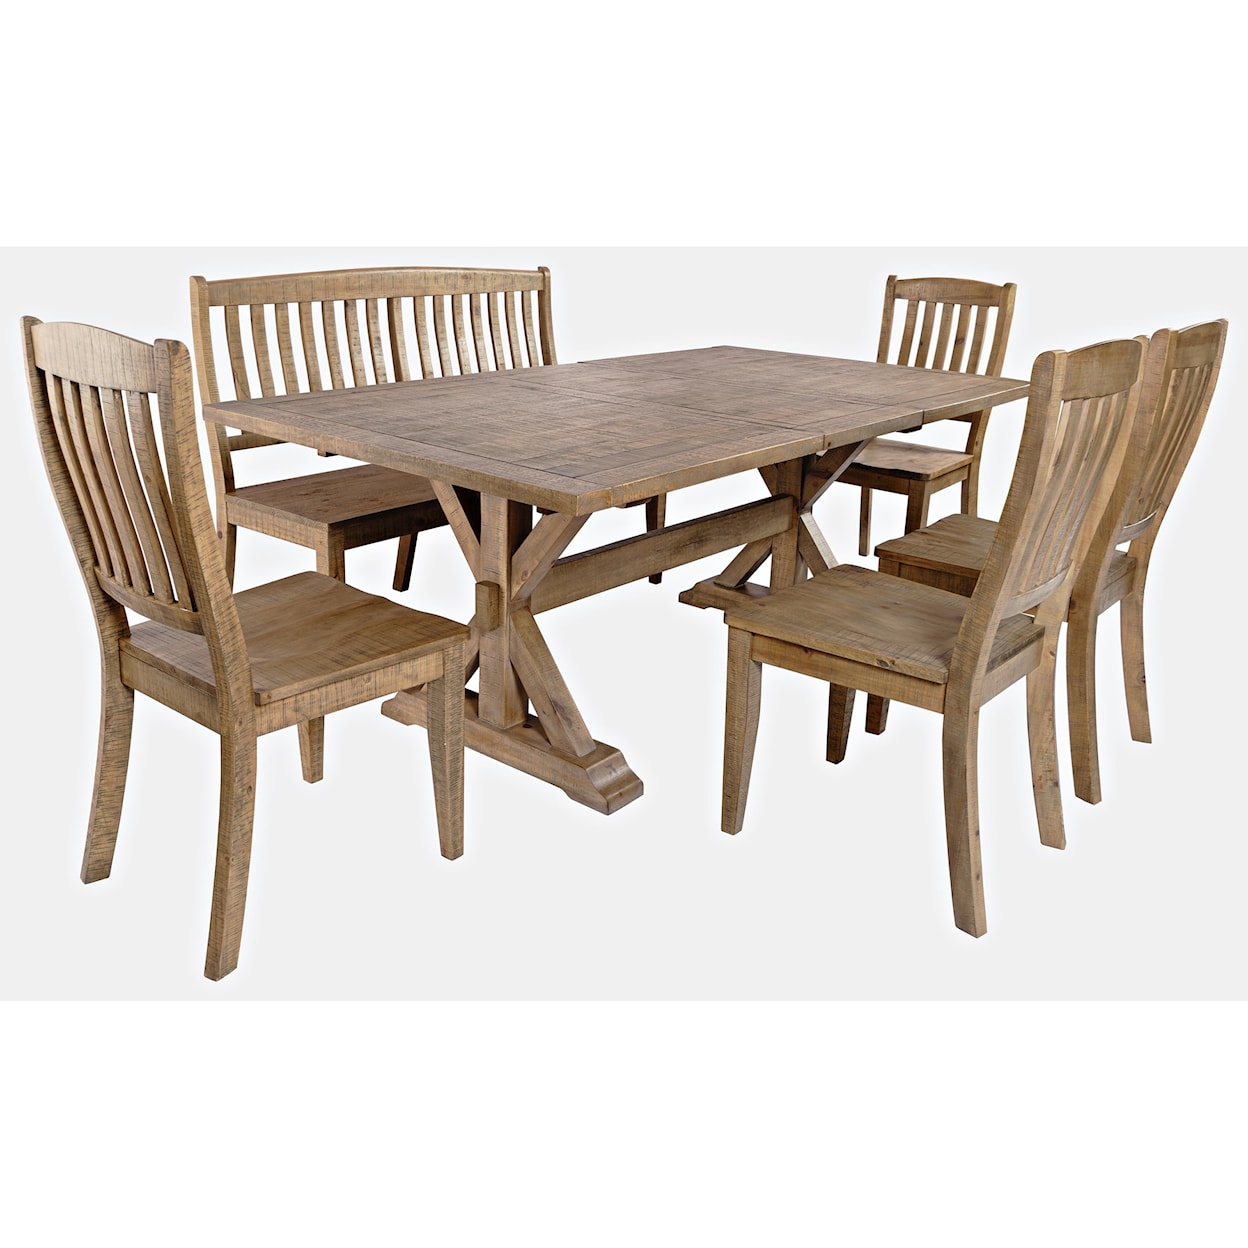 Jofran Carlyle Crossing 6-Piece Dining Table and Chair Set